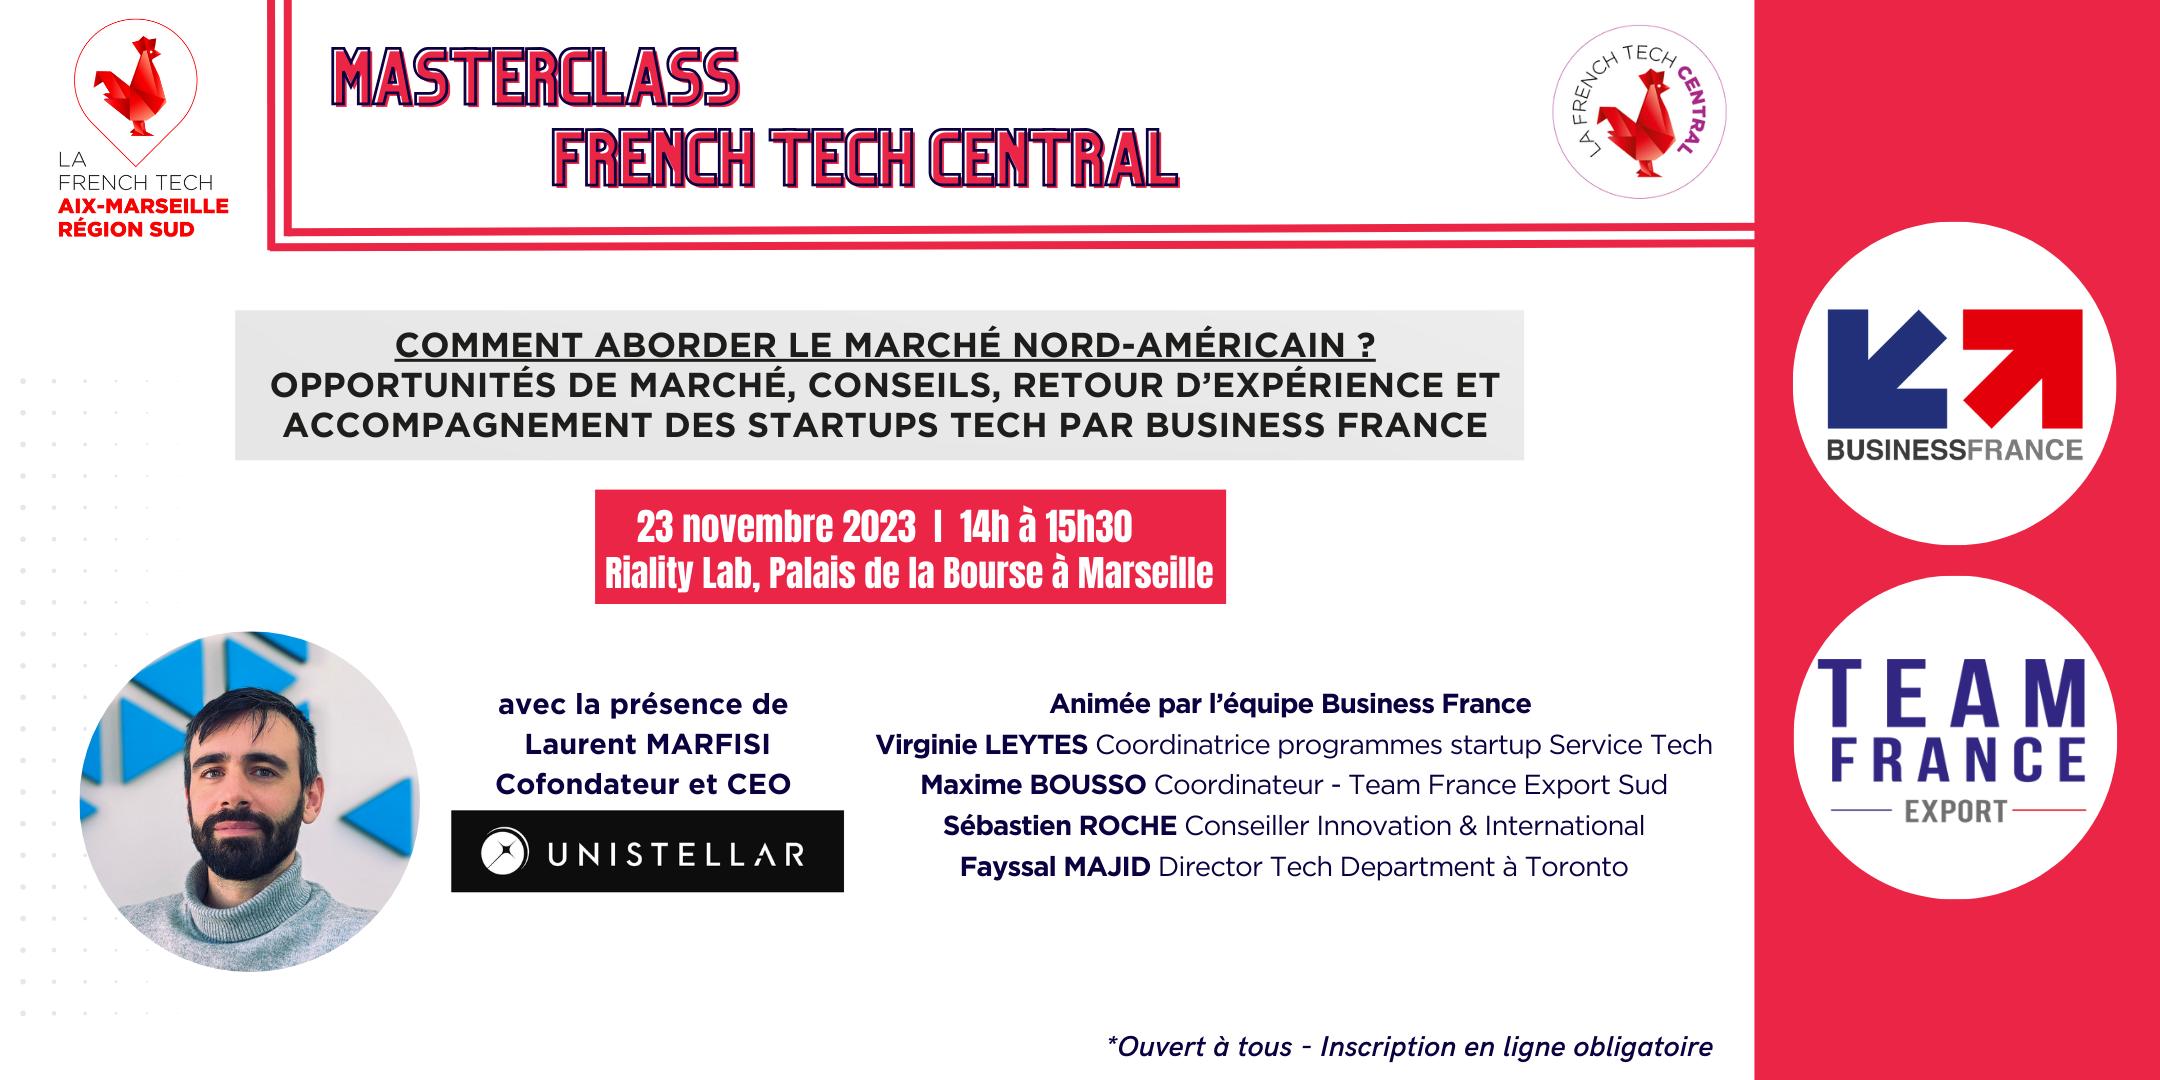 Masterclass French Tech Central – Business France x UNISTELLAR